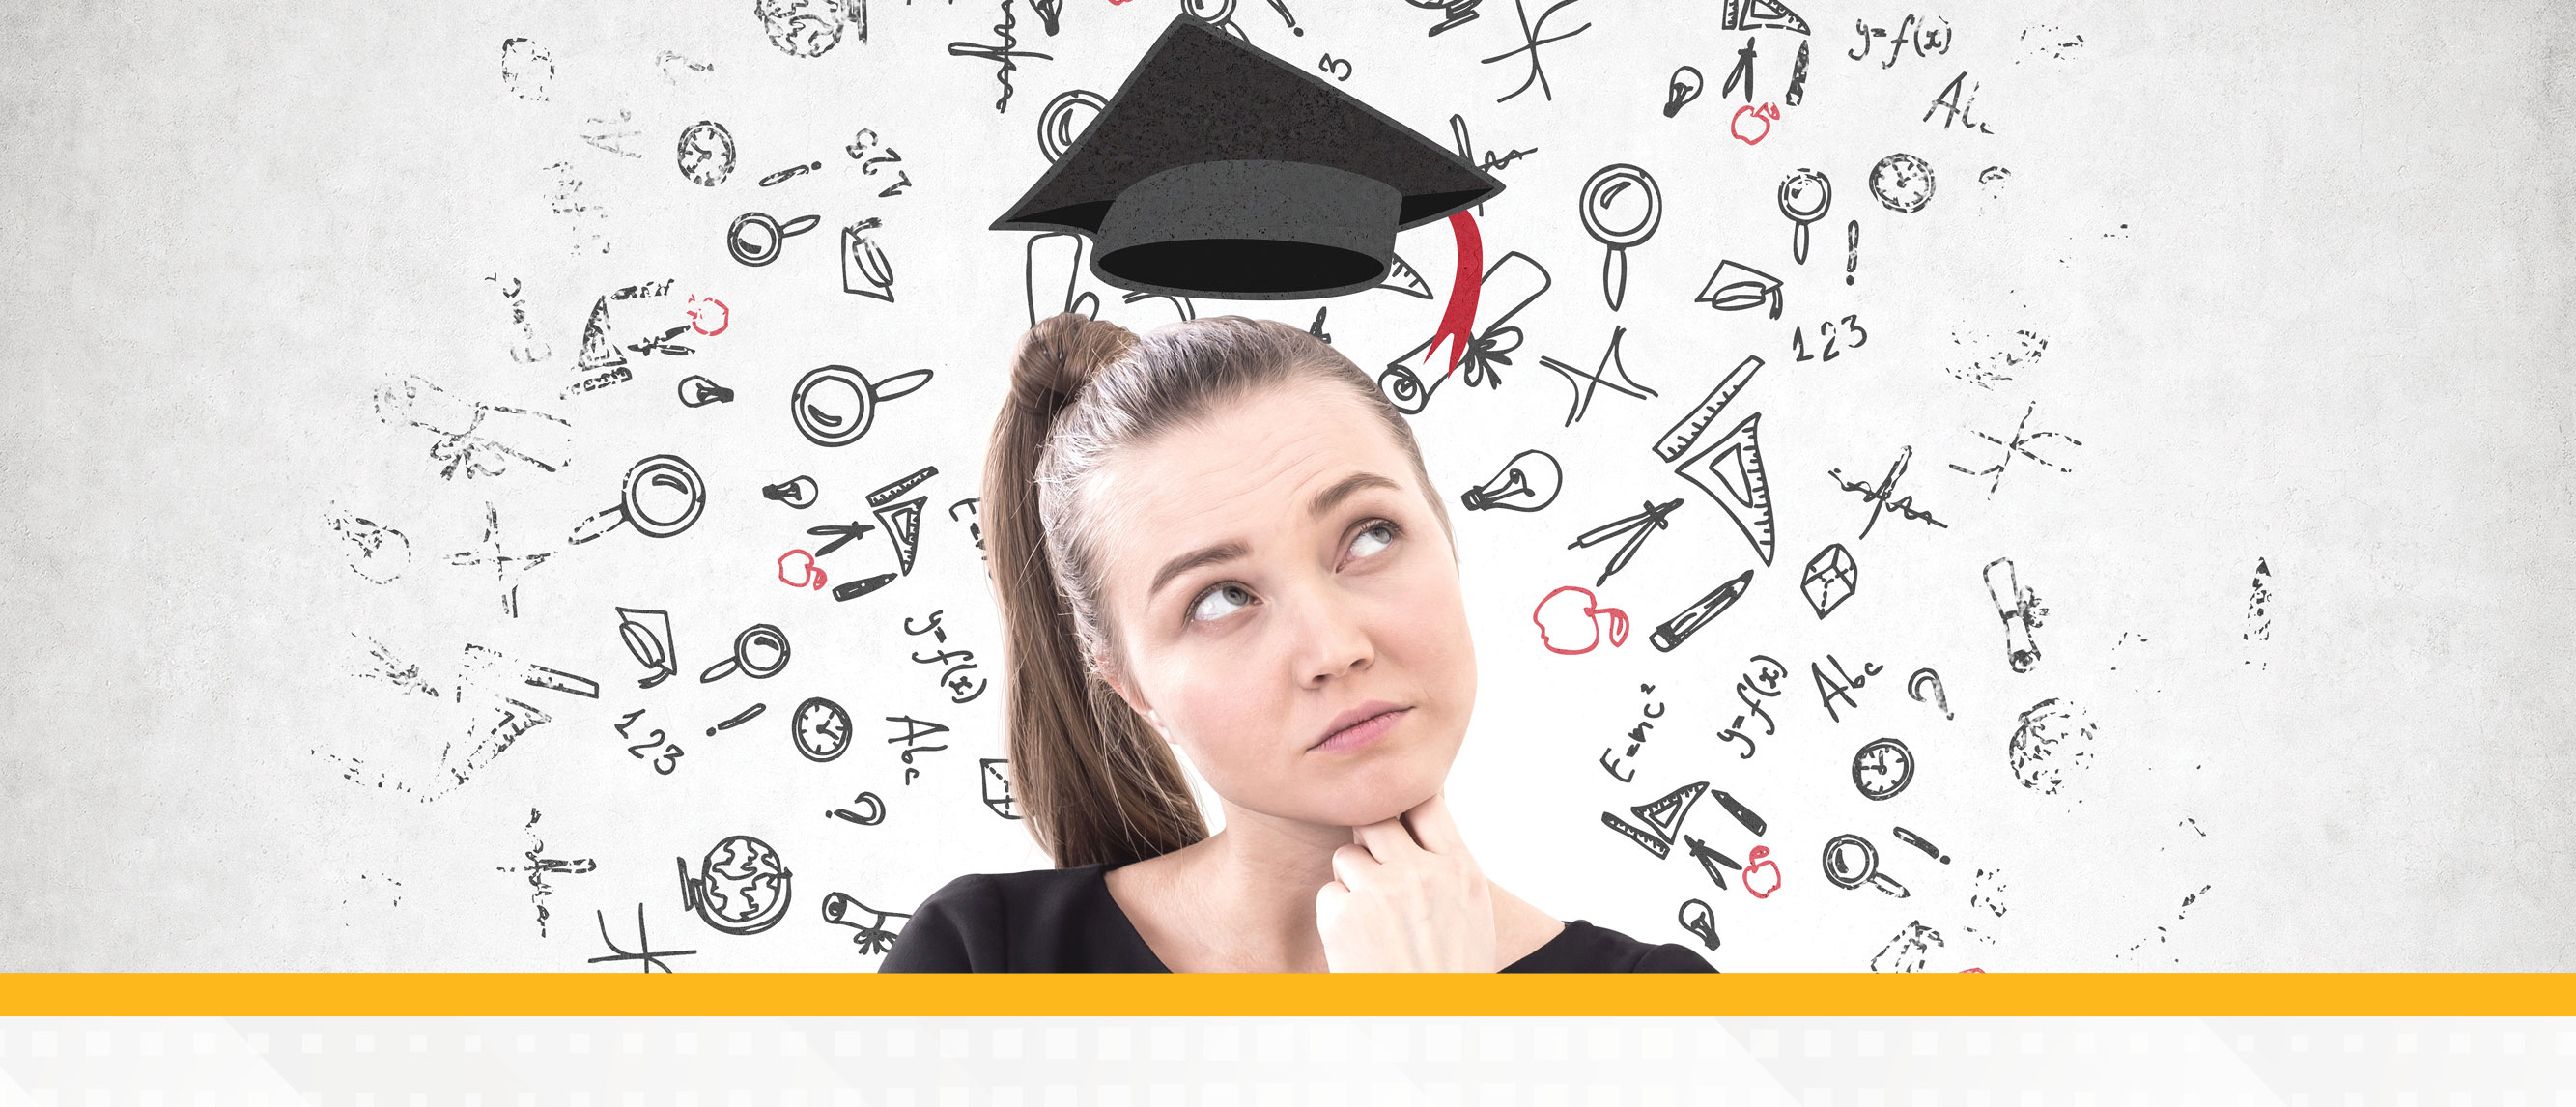 Girl thinking with drawings of school supplies and a graduation cap